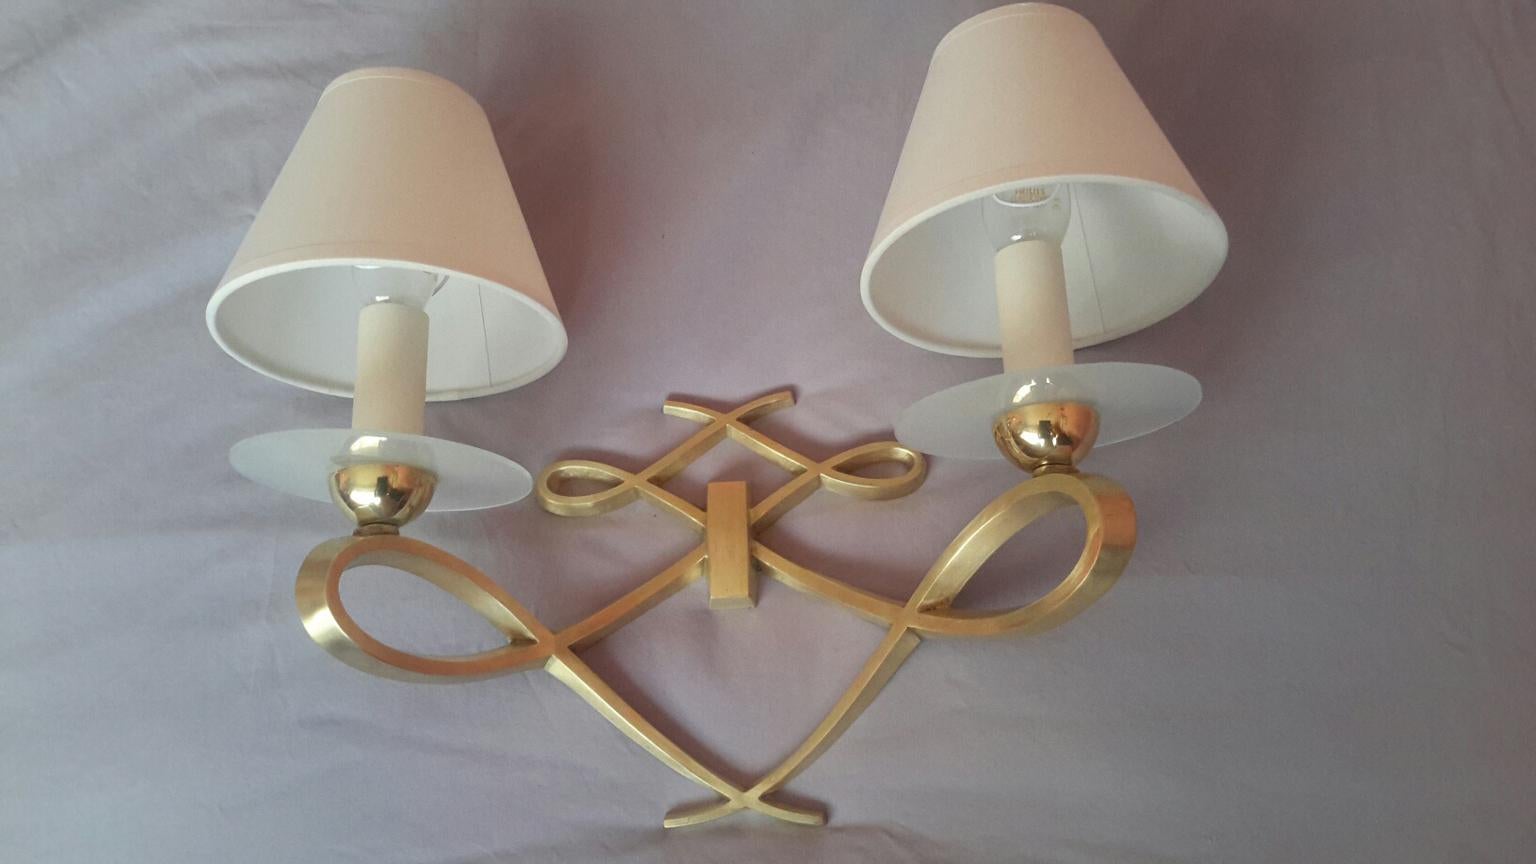 Gilt Pair of French Double Sconces Leleu Style by Arlus, France, 1950s